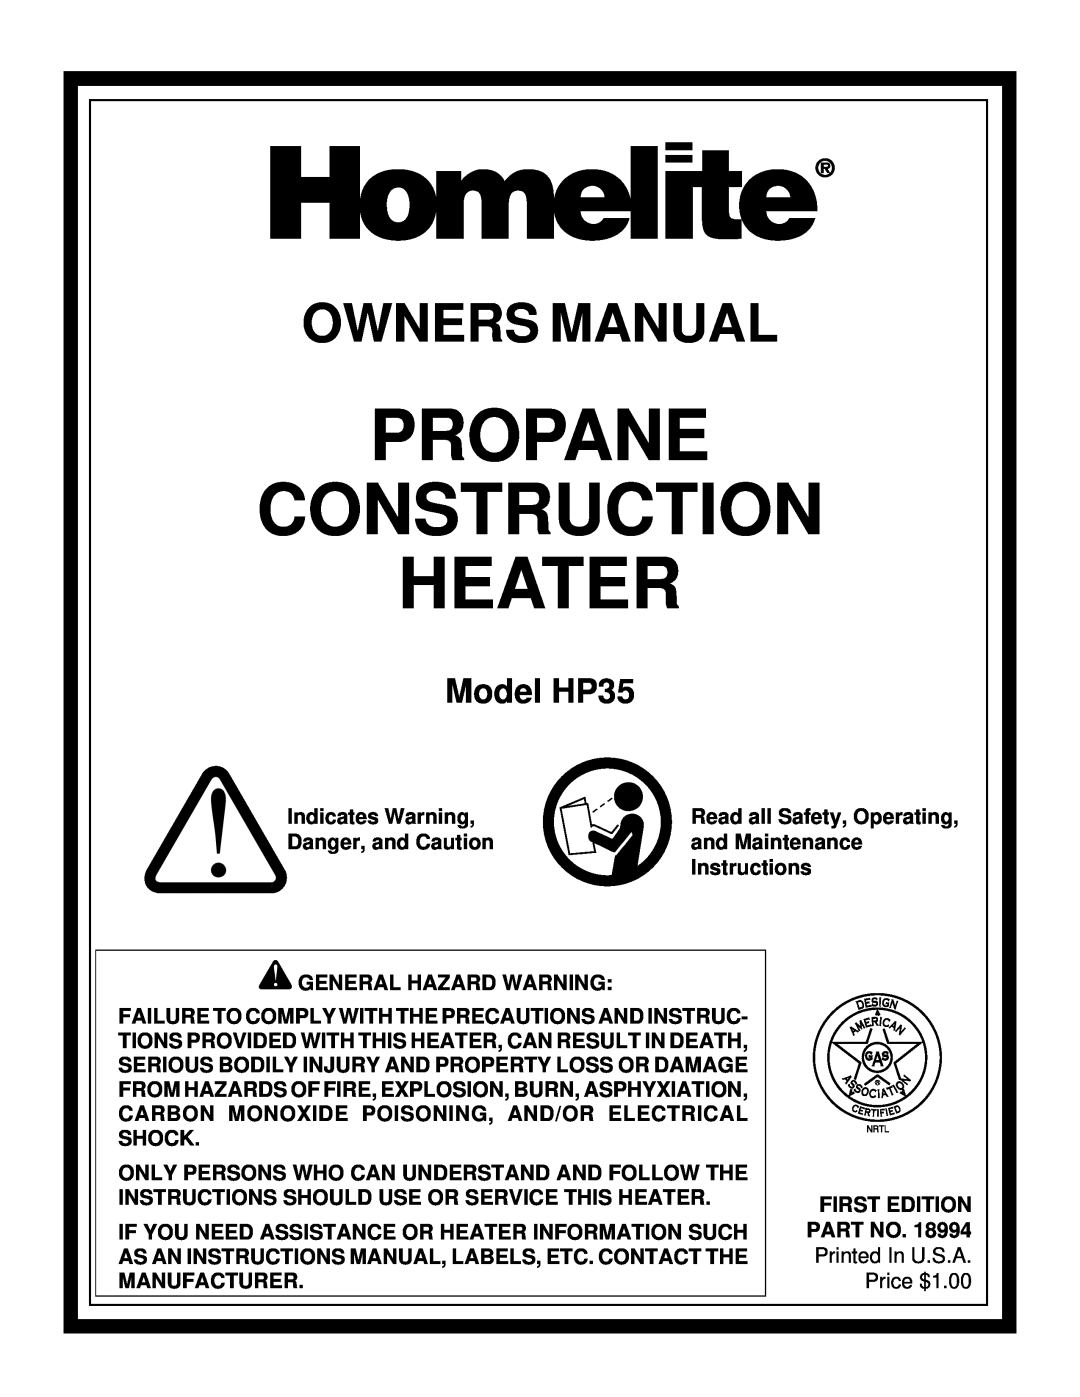 Homelite owner manual Propane Construction Heater, Owners Manual, Model HP35 